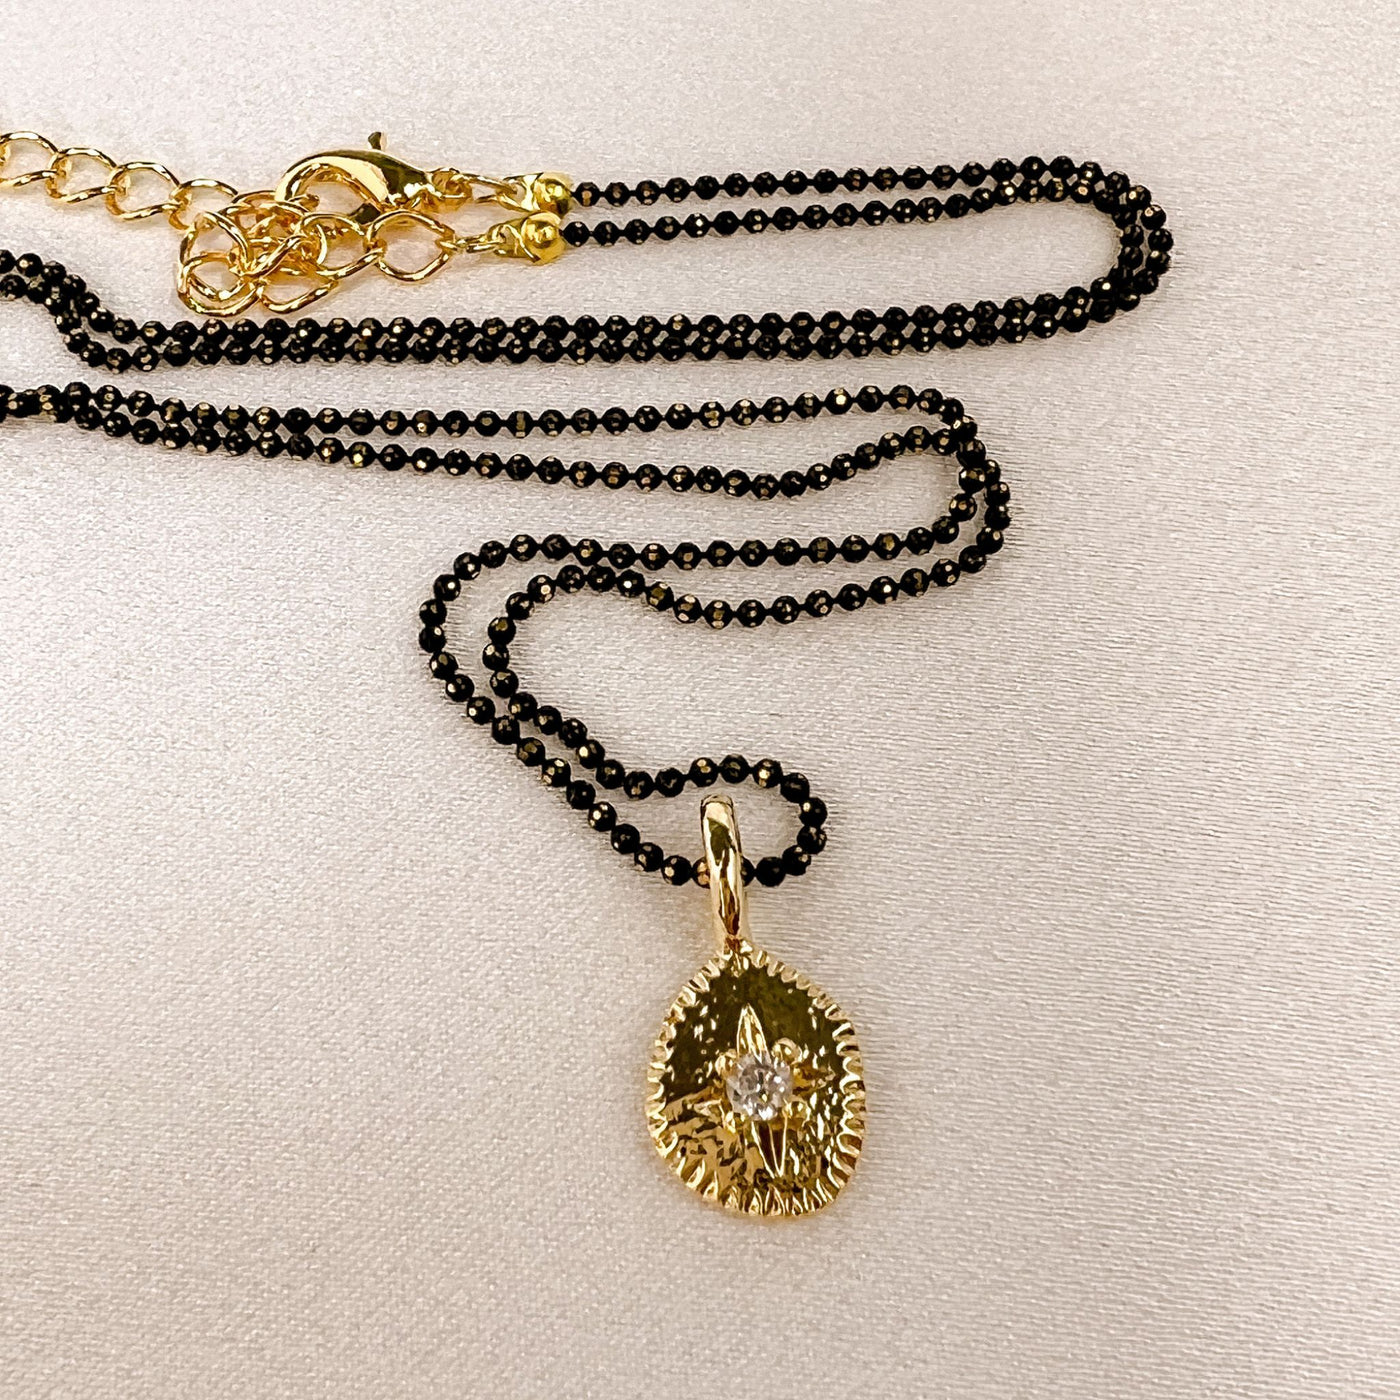 Starbrite Necklace in Black and Gold